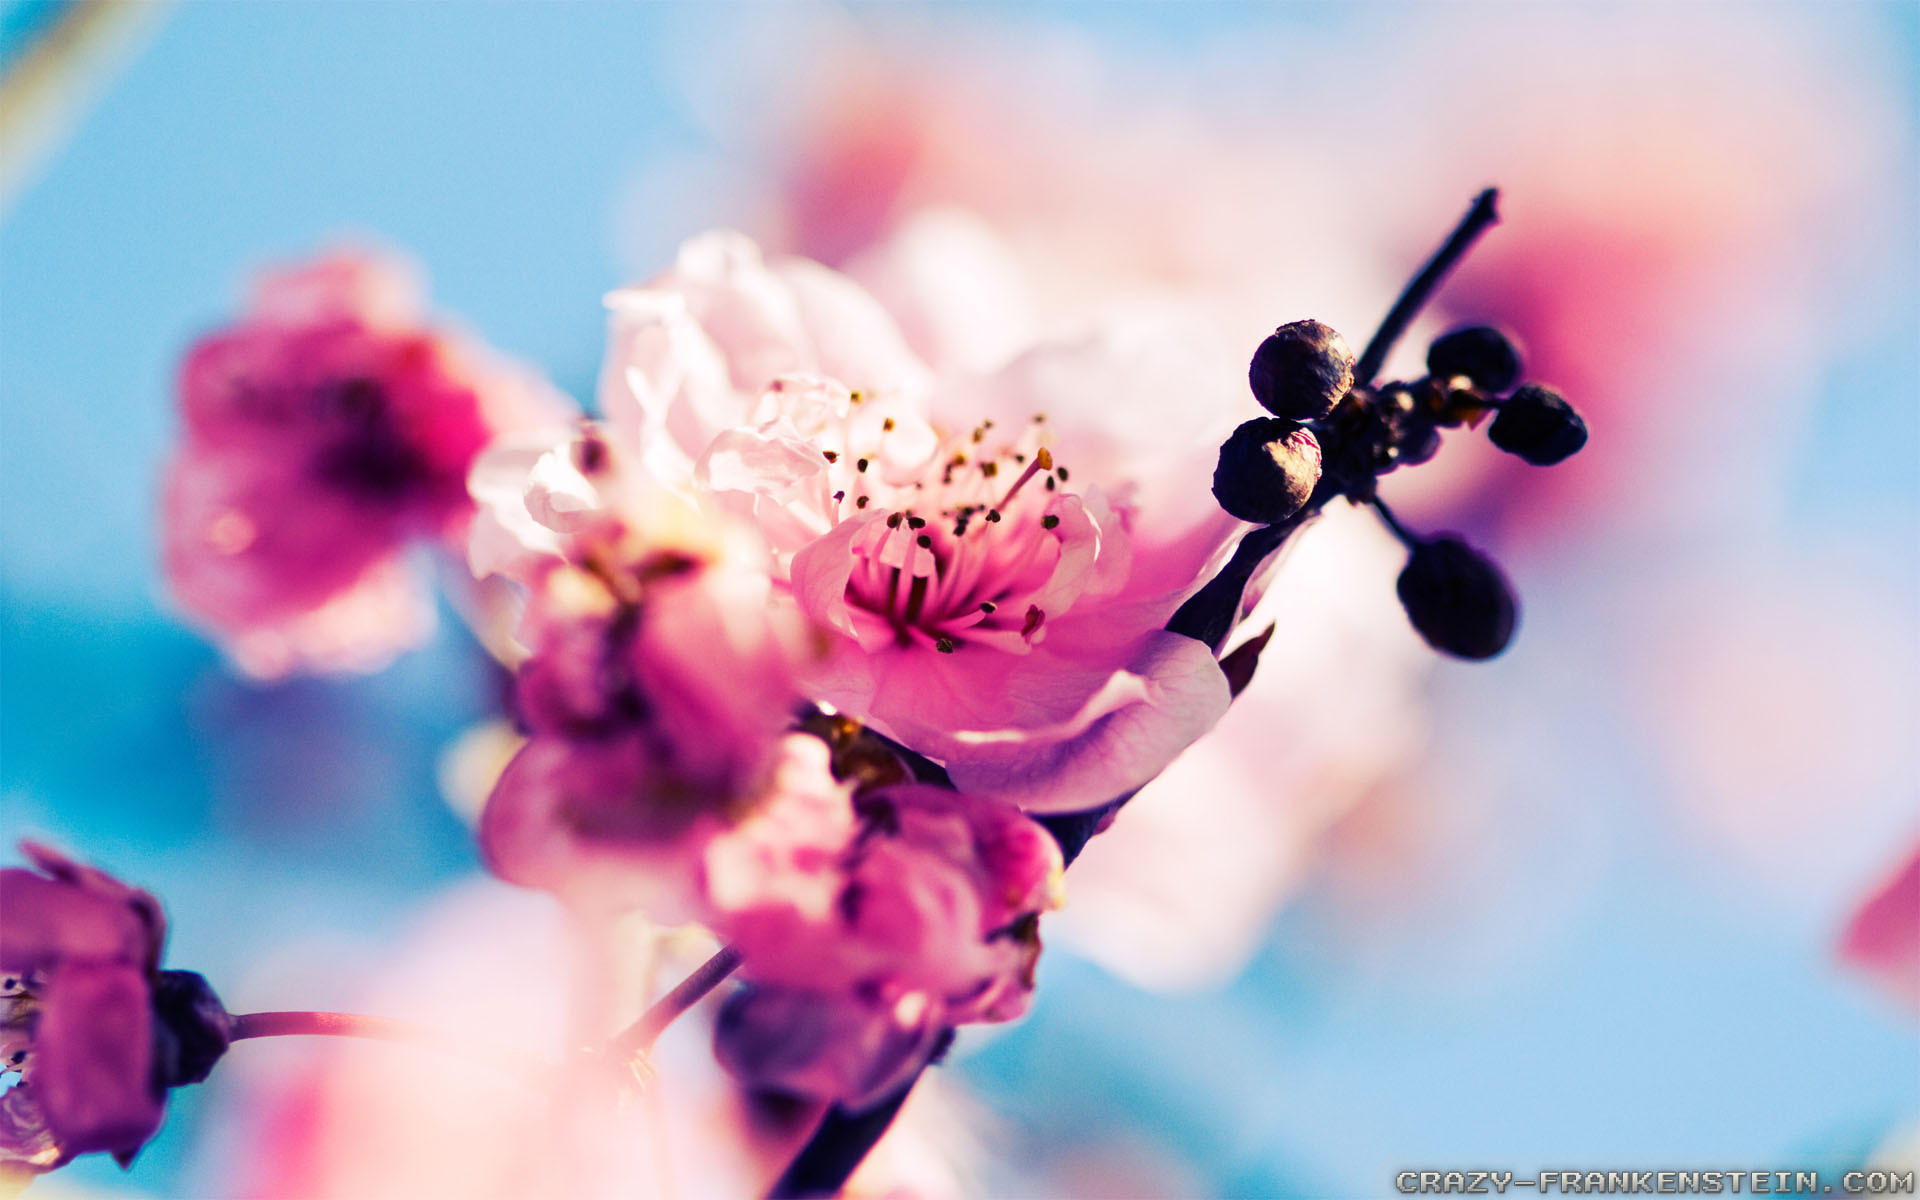 early spring flowers wallpaper